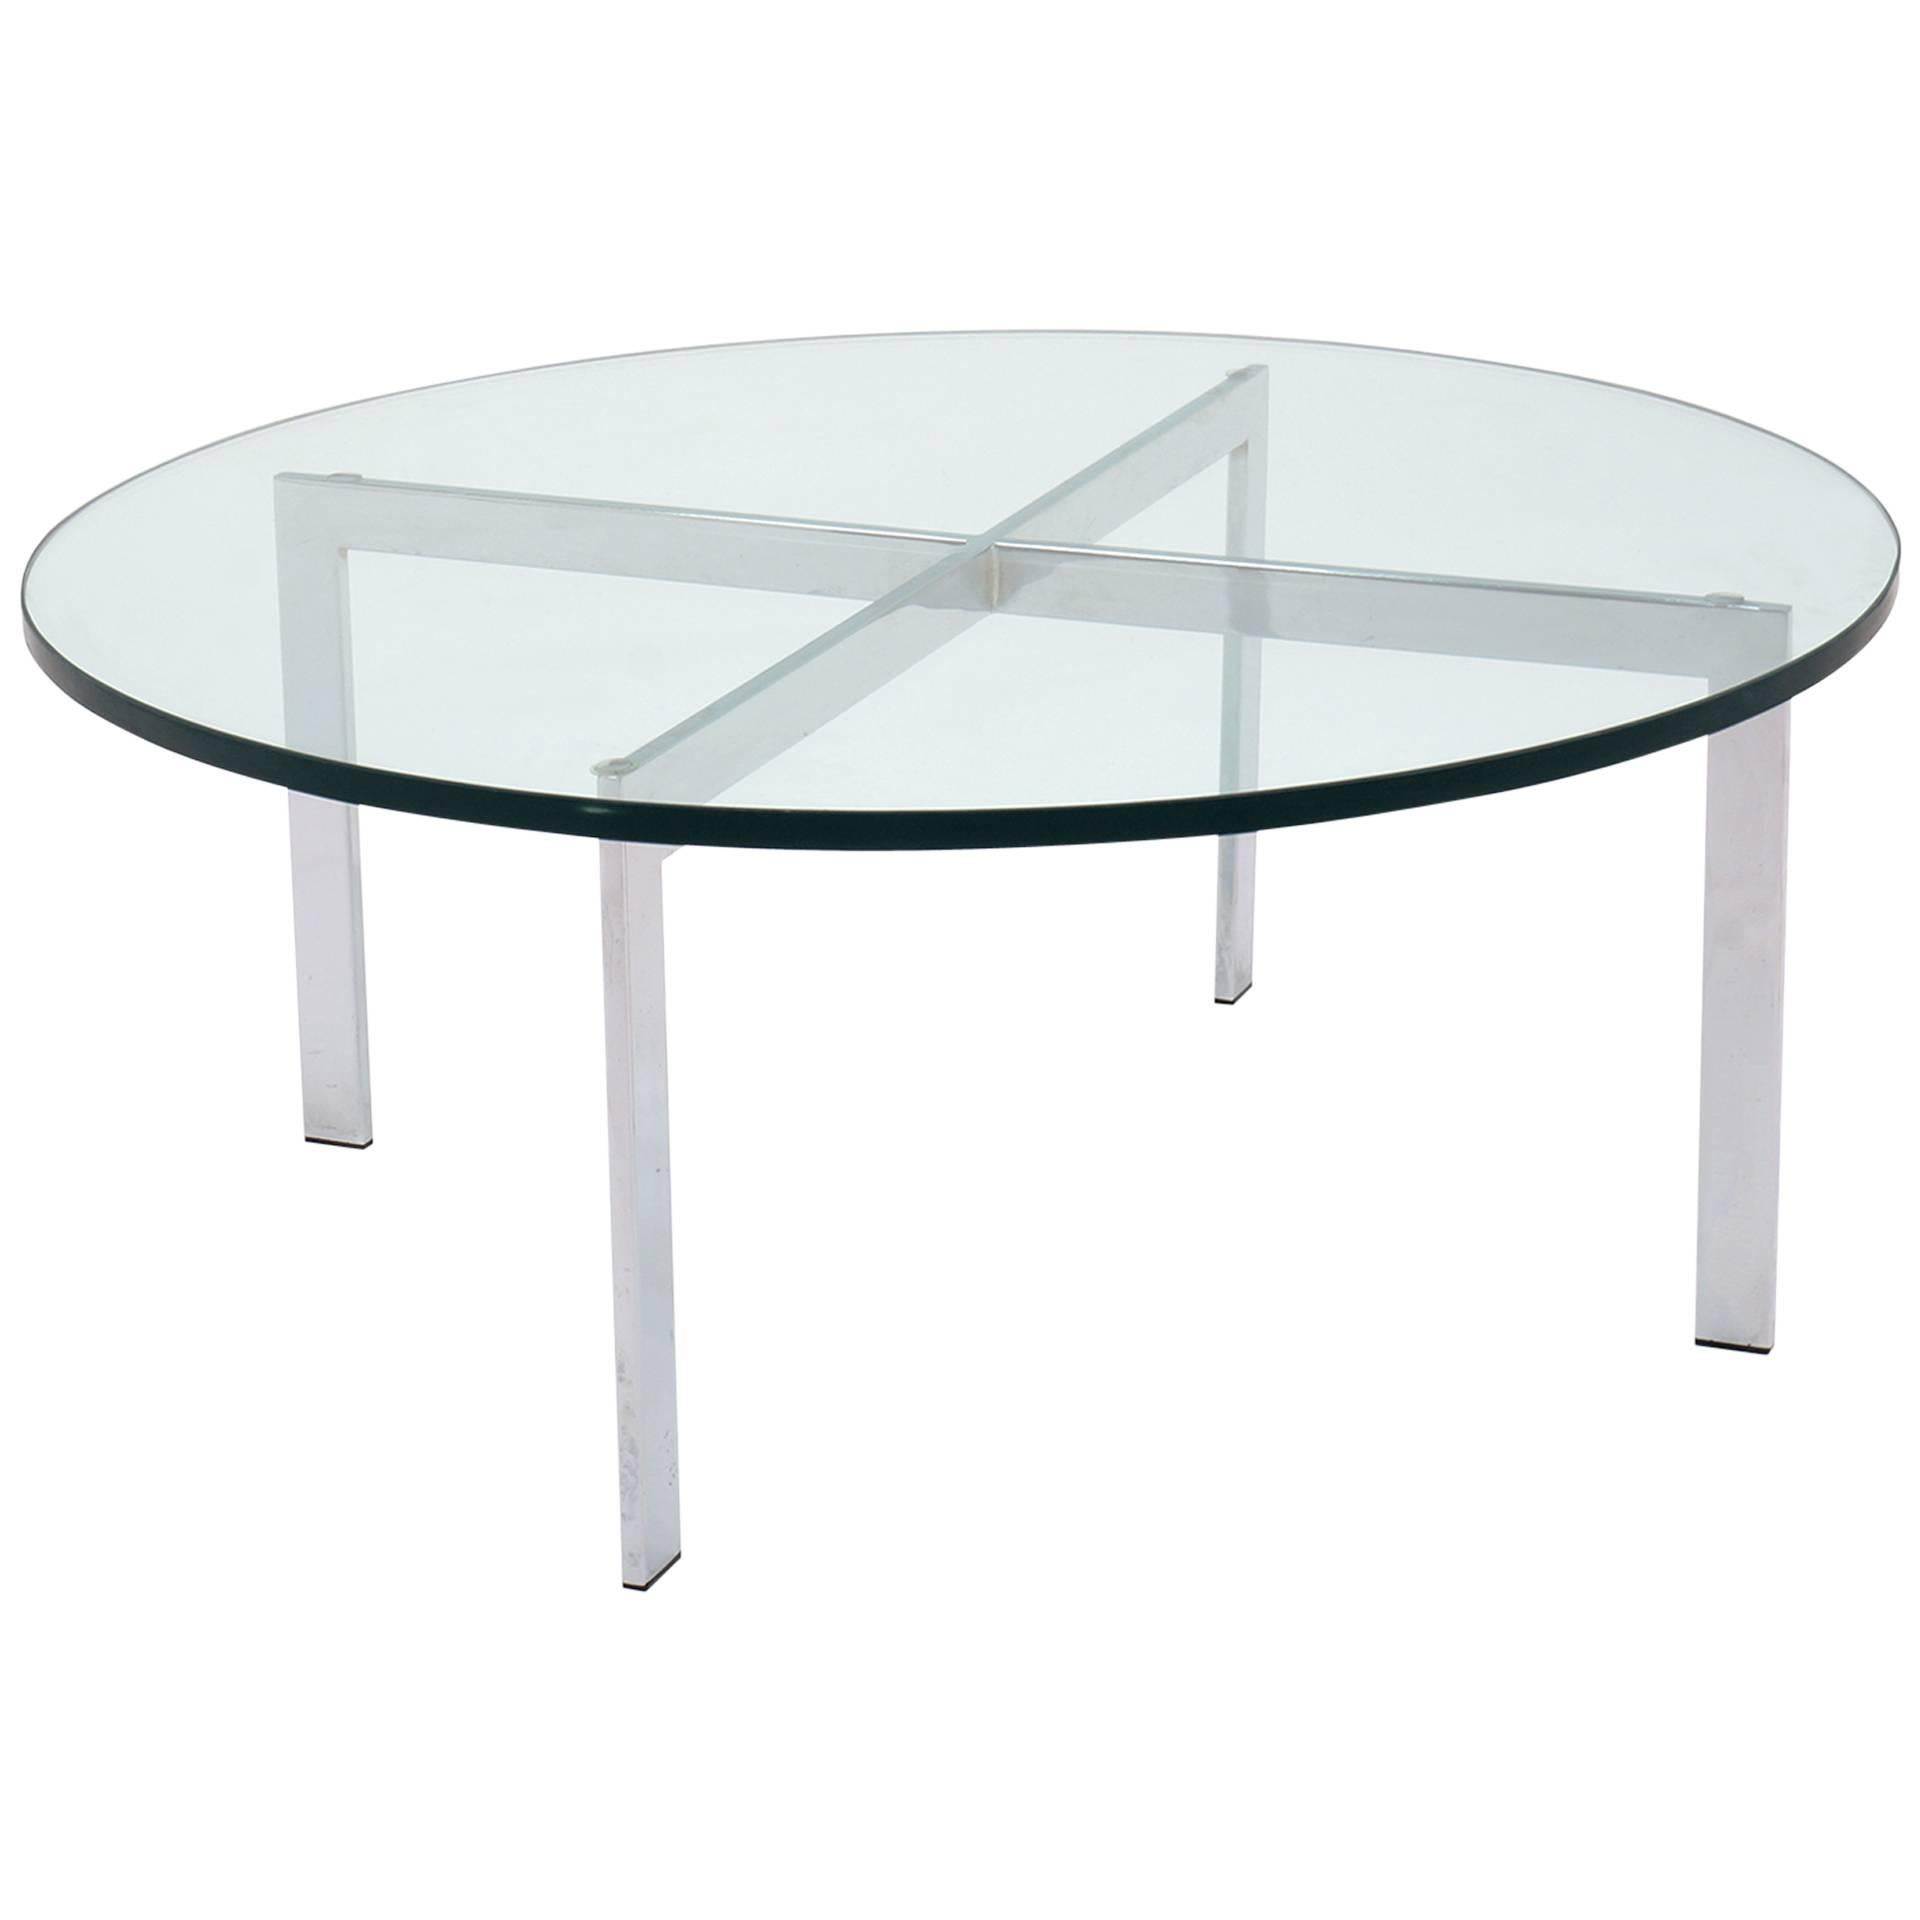 Milo Baughman for Thayer Coggin, Round Chrome and Glass Coffee Table